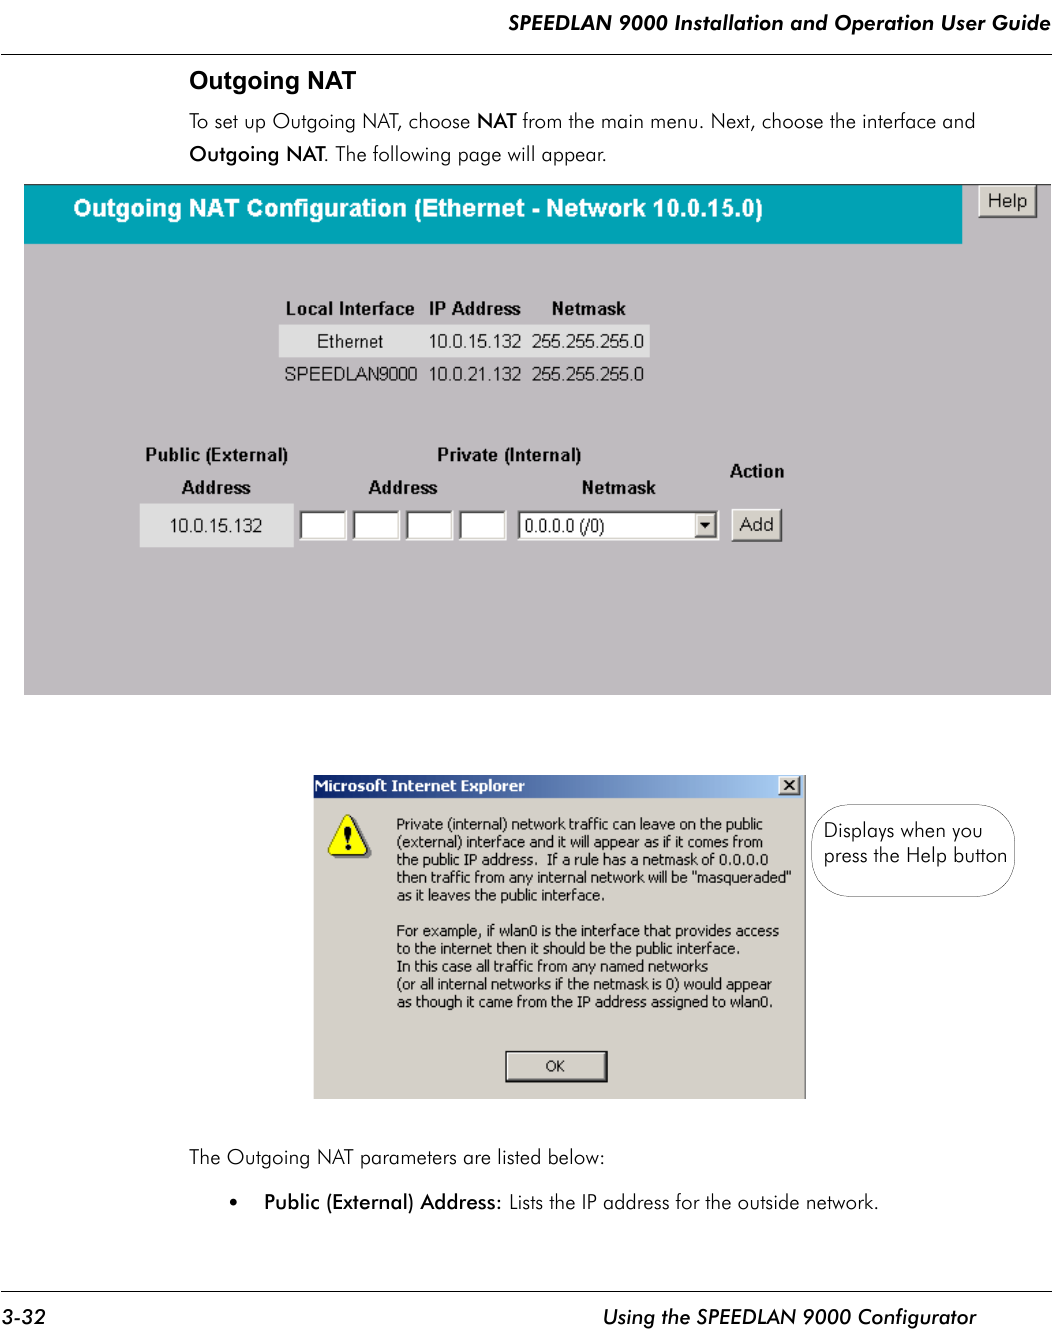 SPEEDLAN 9000 Installation and Operation User Guide 3-32 Using the SPEEDLAN 9000 ConfiguratorOutgoing NATTo set up Outgoing NAT, choose NAT from the main menu. Next, choose the interface and Outgoing NAT. The following page will appear.The Outgoing NAT parameters are listed below:•Public (External) Address: Lists the IP address for the outside network.Displays when youpress the Help button